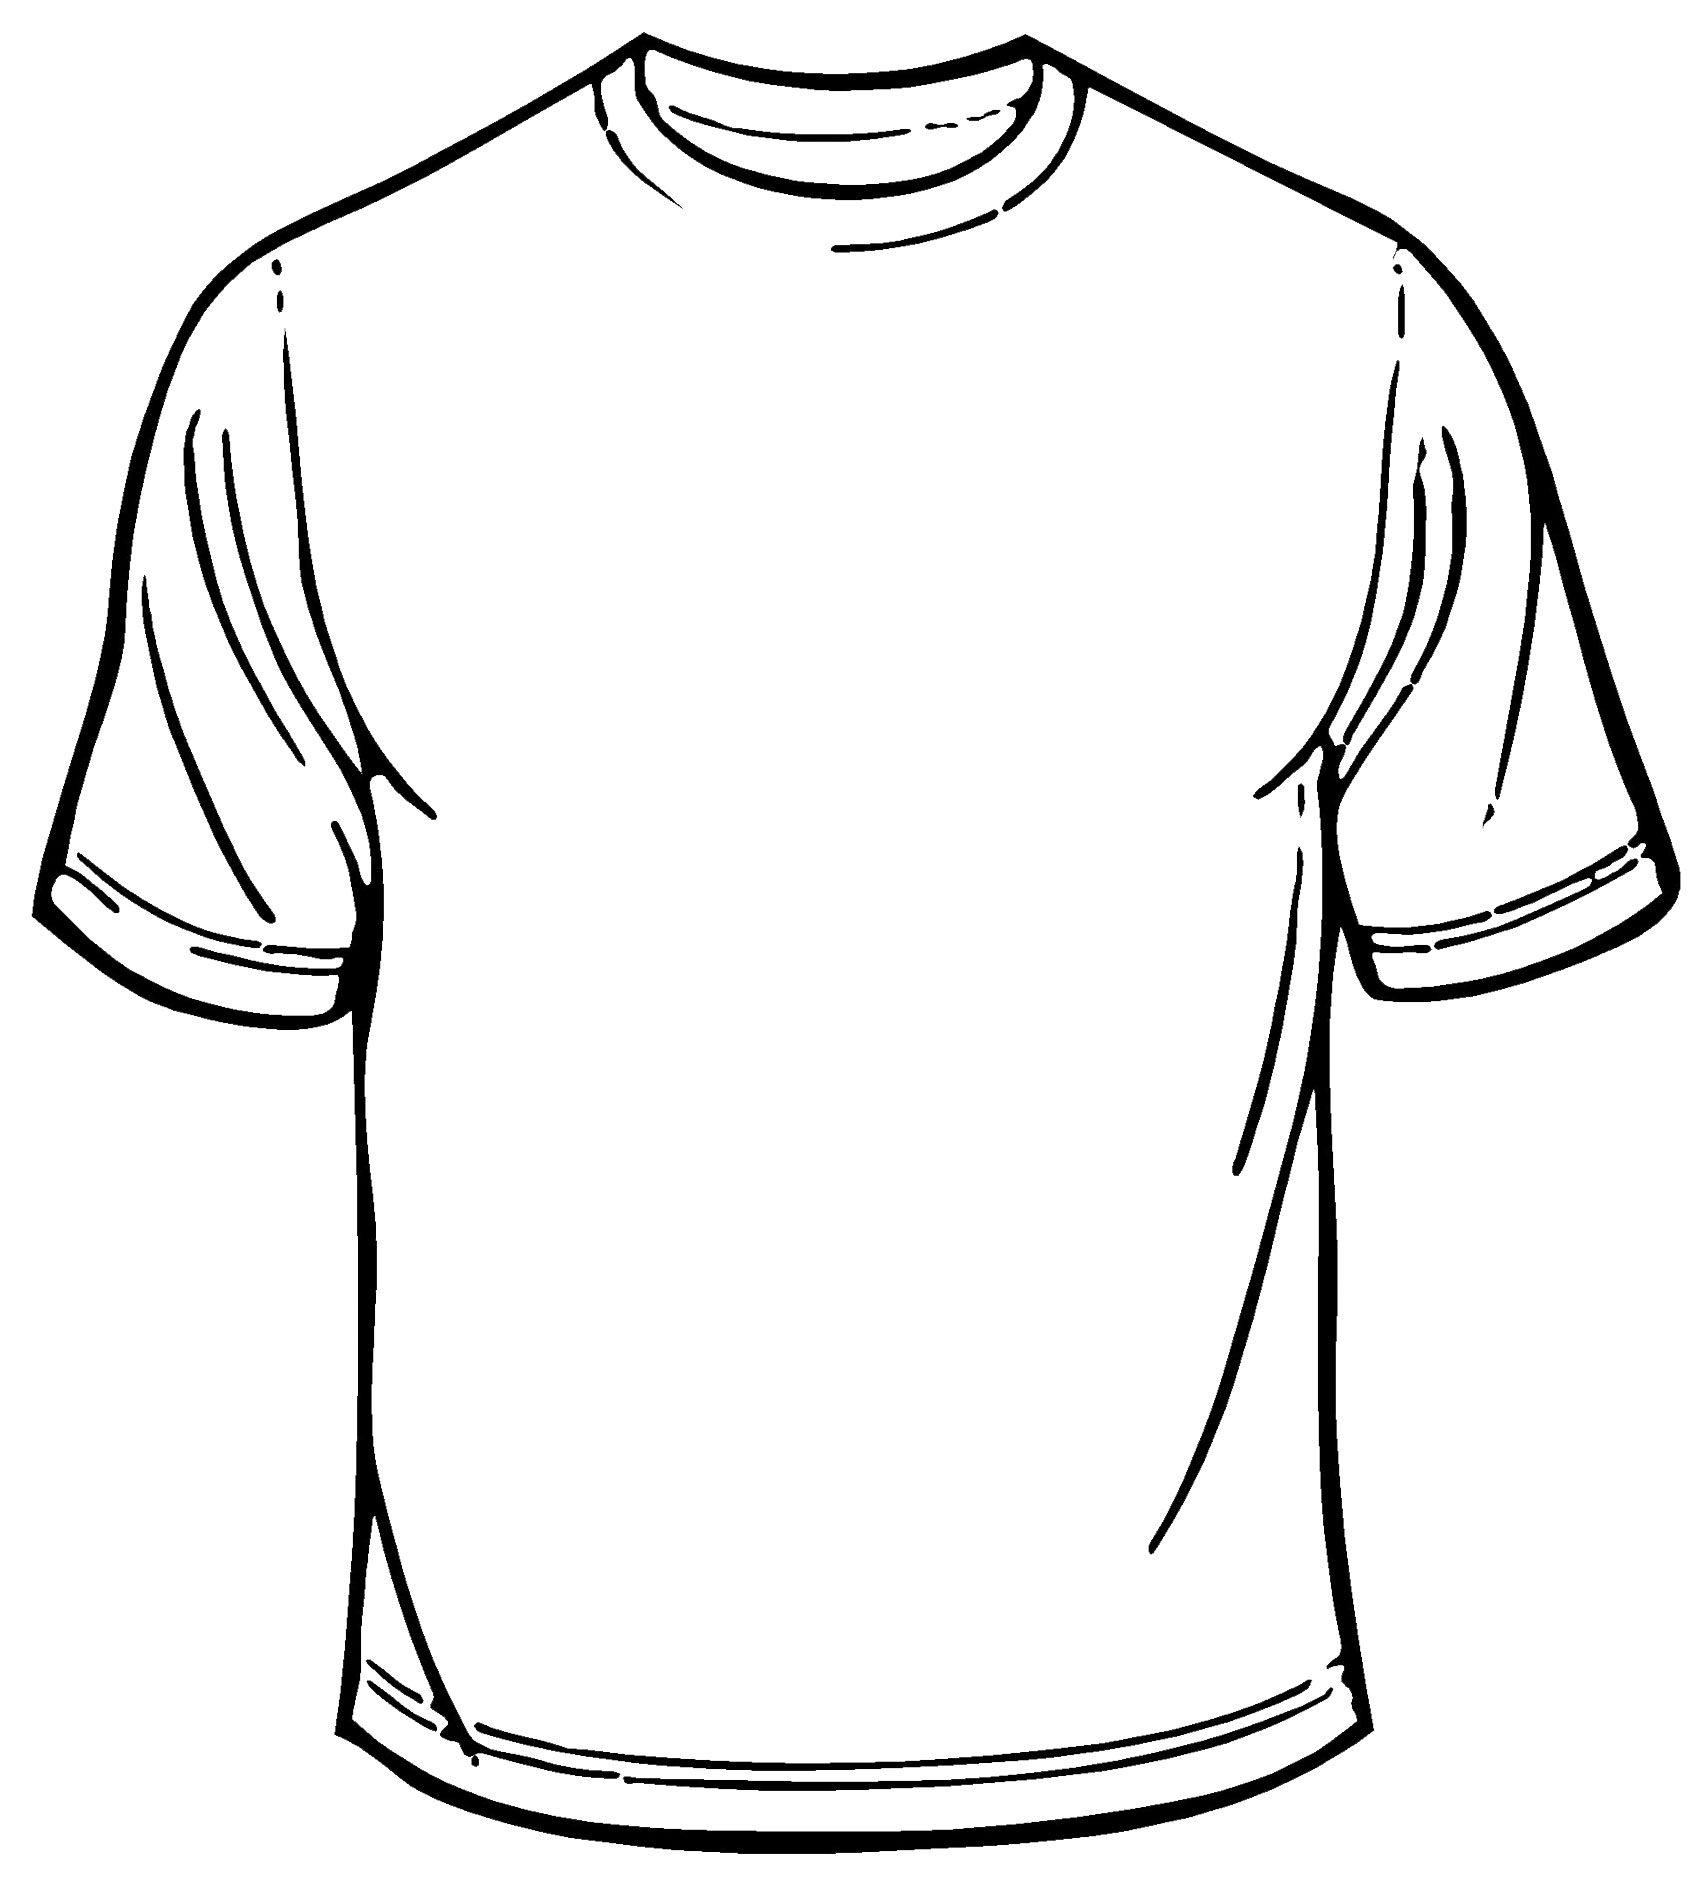 Blank Tshirt Template | Best Template Collection